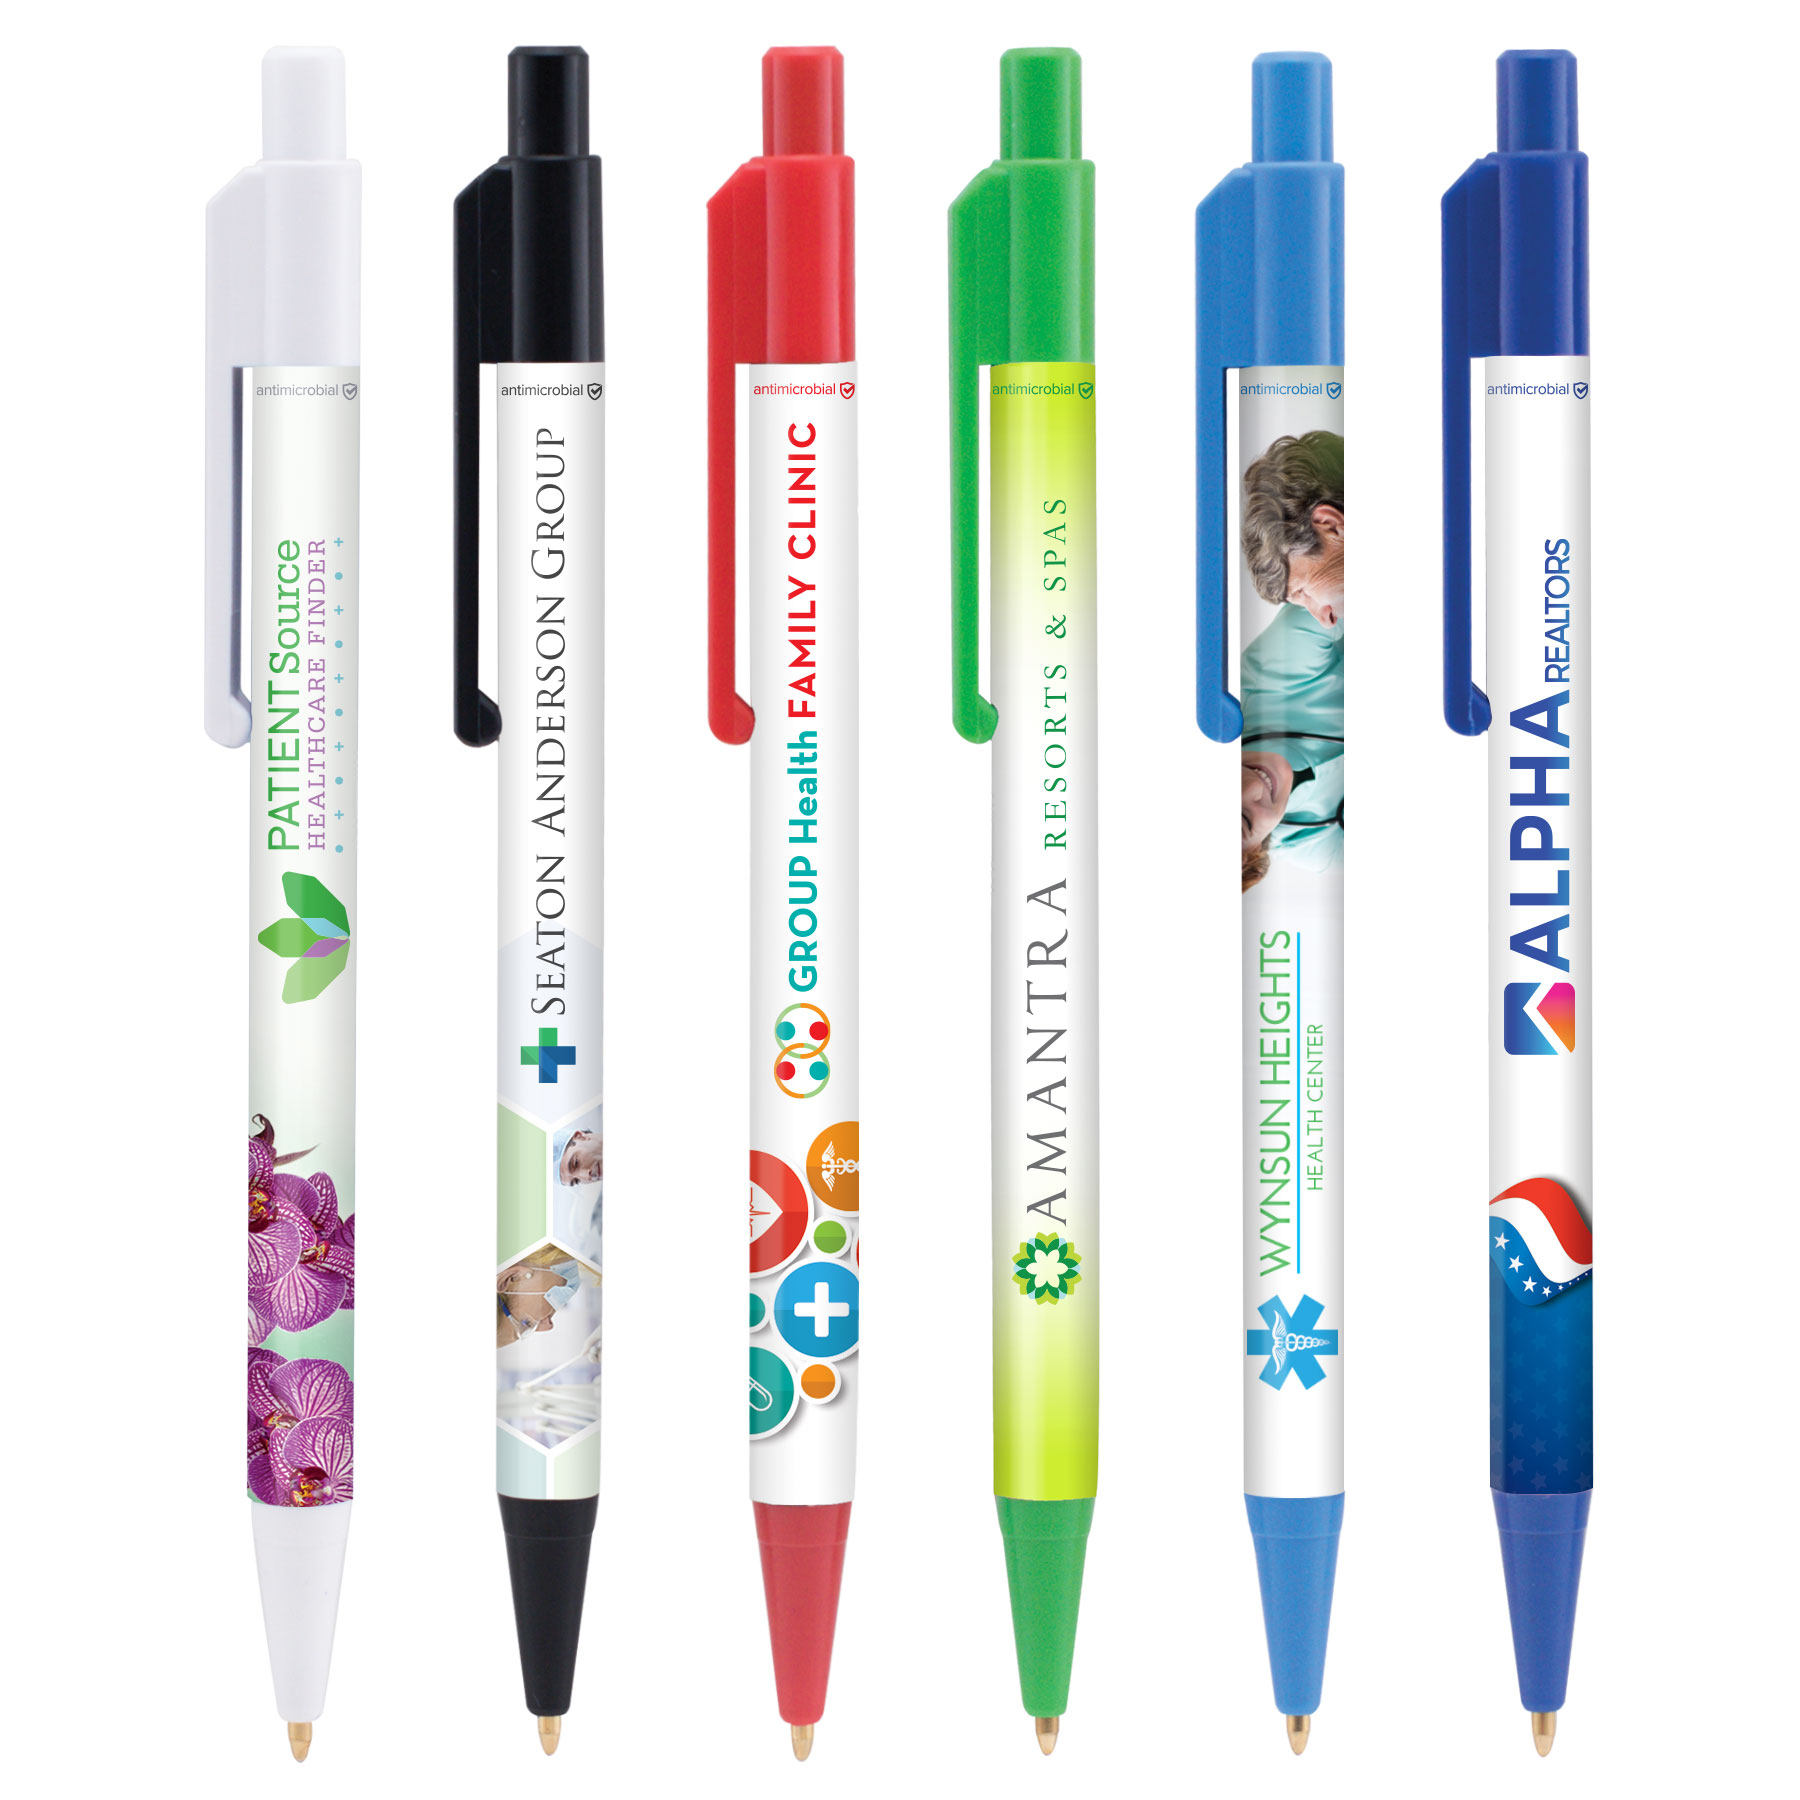 Sample Image of our Antimicrobial Click Ballpoint Pens in white light blue red navy green black trim colors